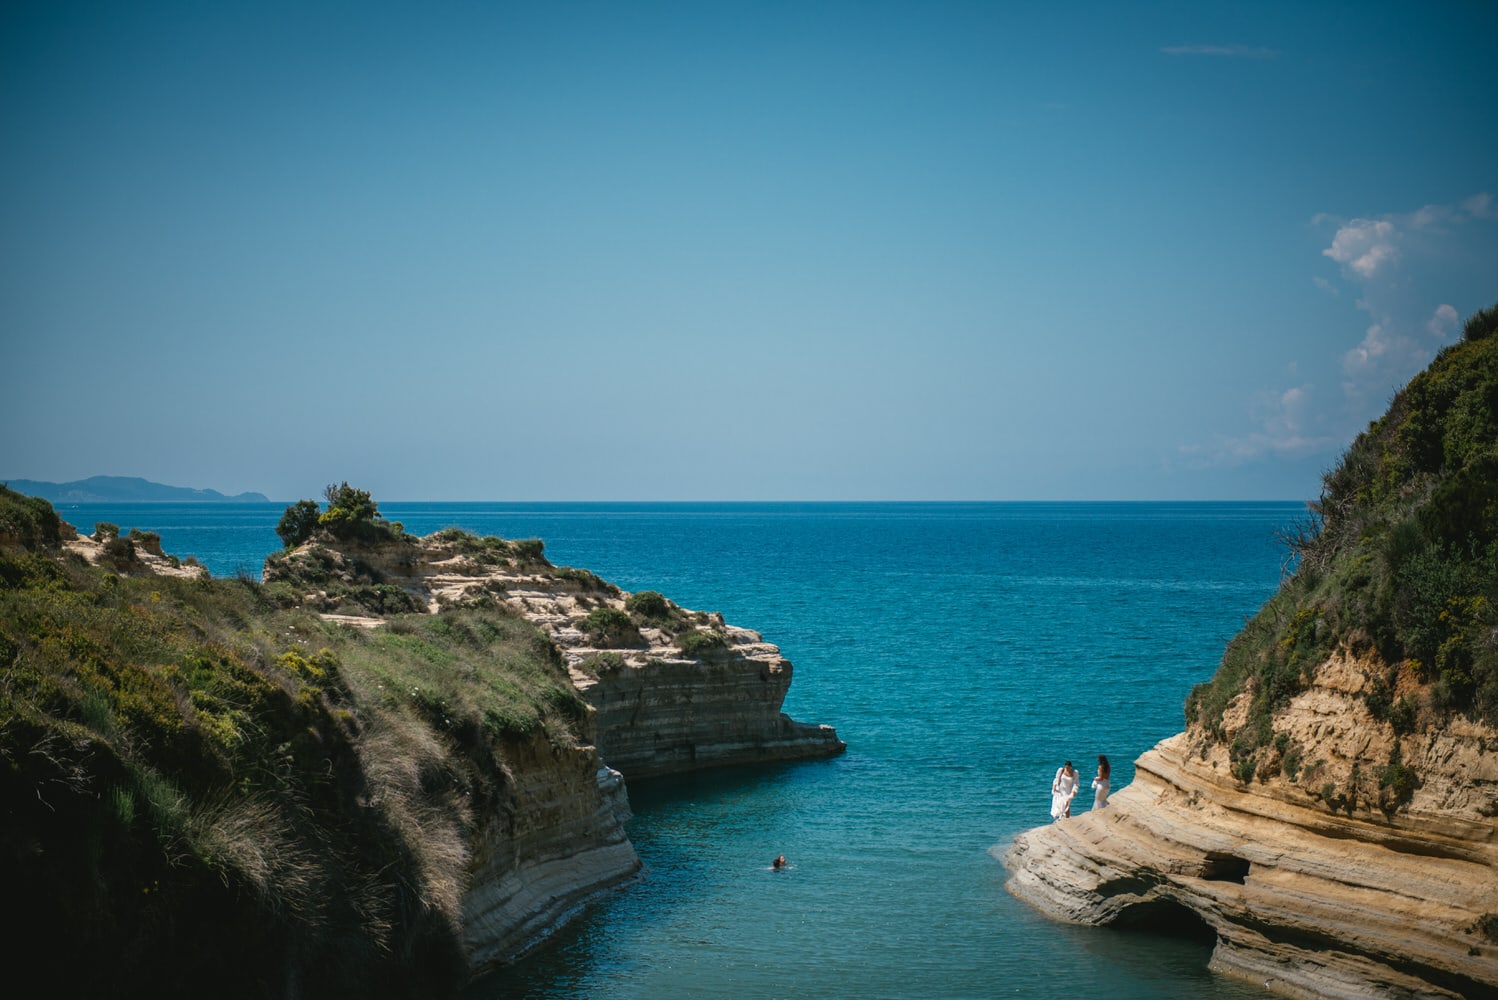 A picturesque moment at the Canal d'Amour, a romantic spot in Corfu for their elopement.